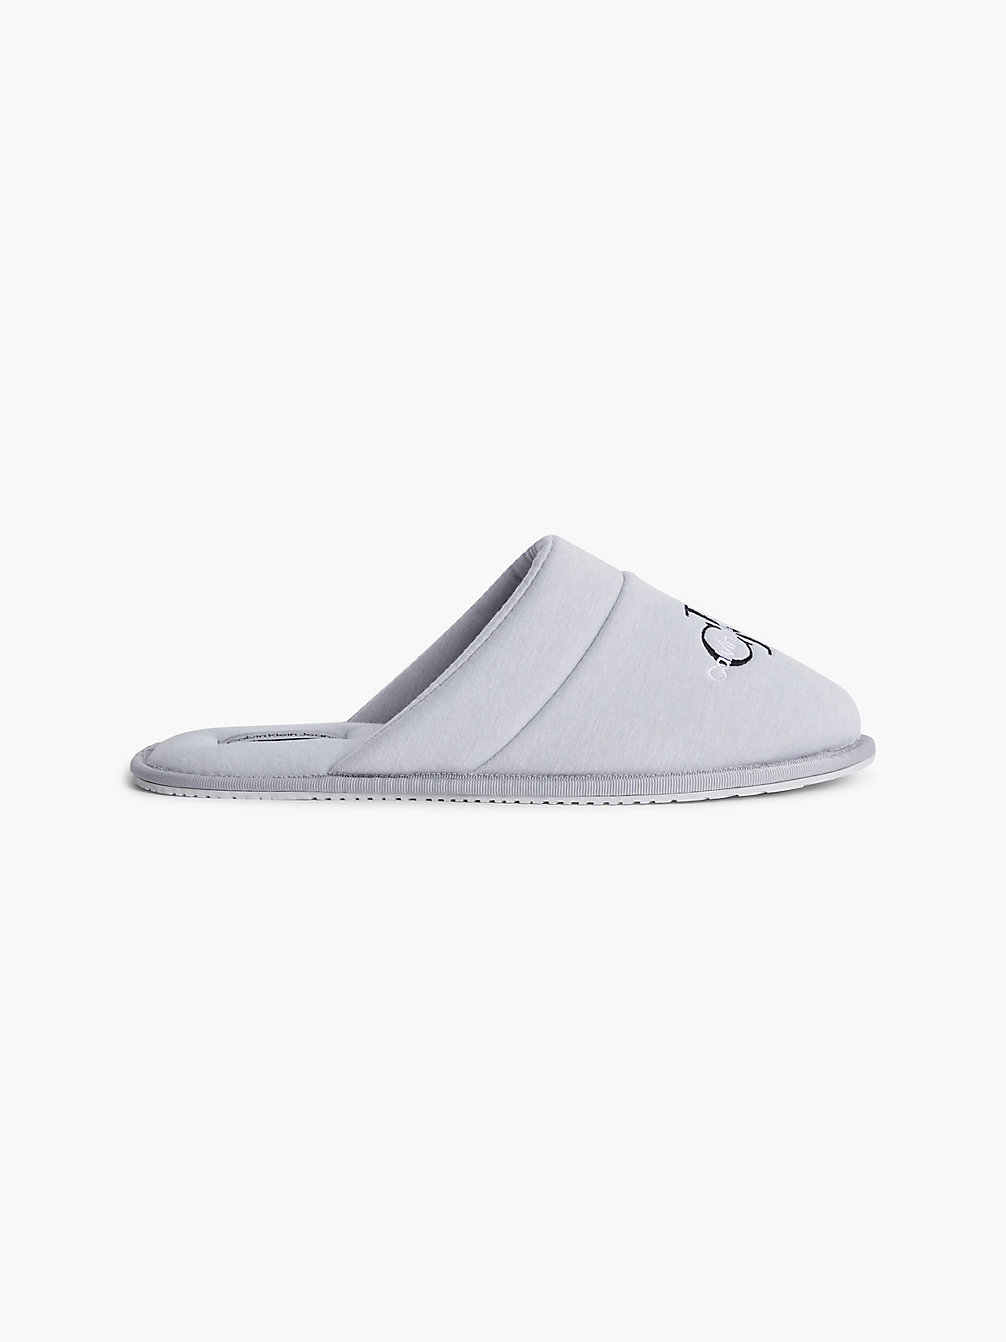 SILVER GREY Chaussons Recyclés undefined hommes Calvin Klein